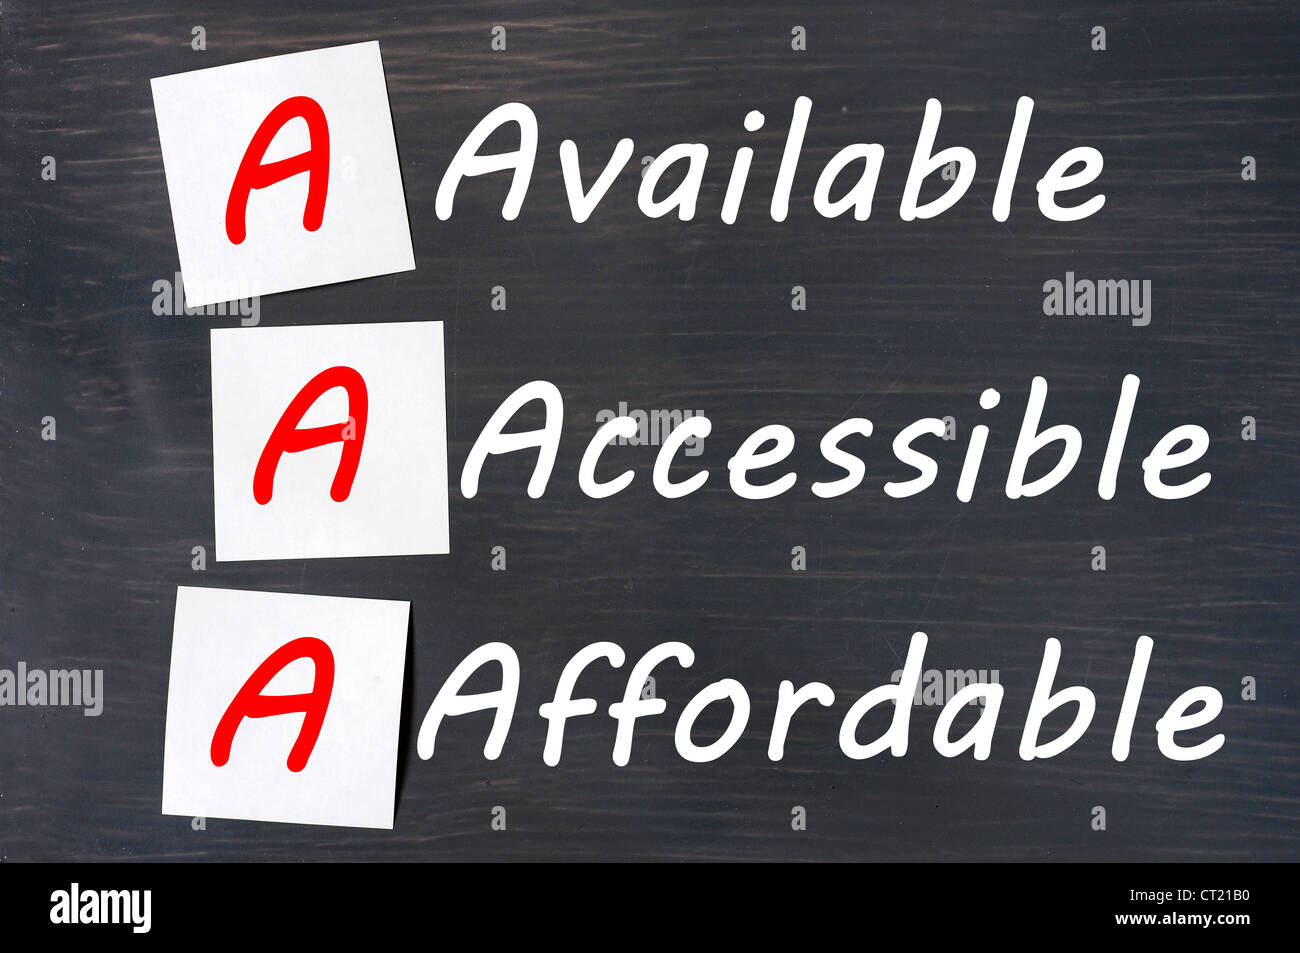 school blackboard background class note red menu sticky aaa abbreviation accessible acronym affordable available background Stock Photo